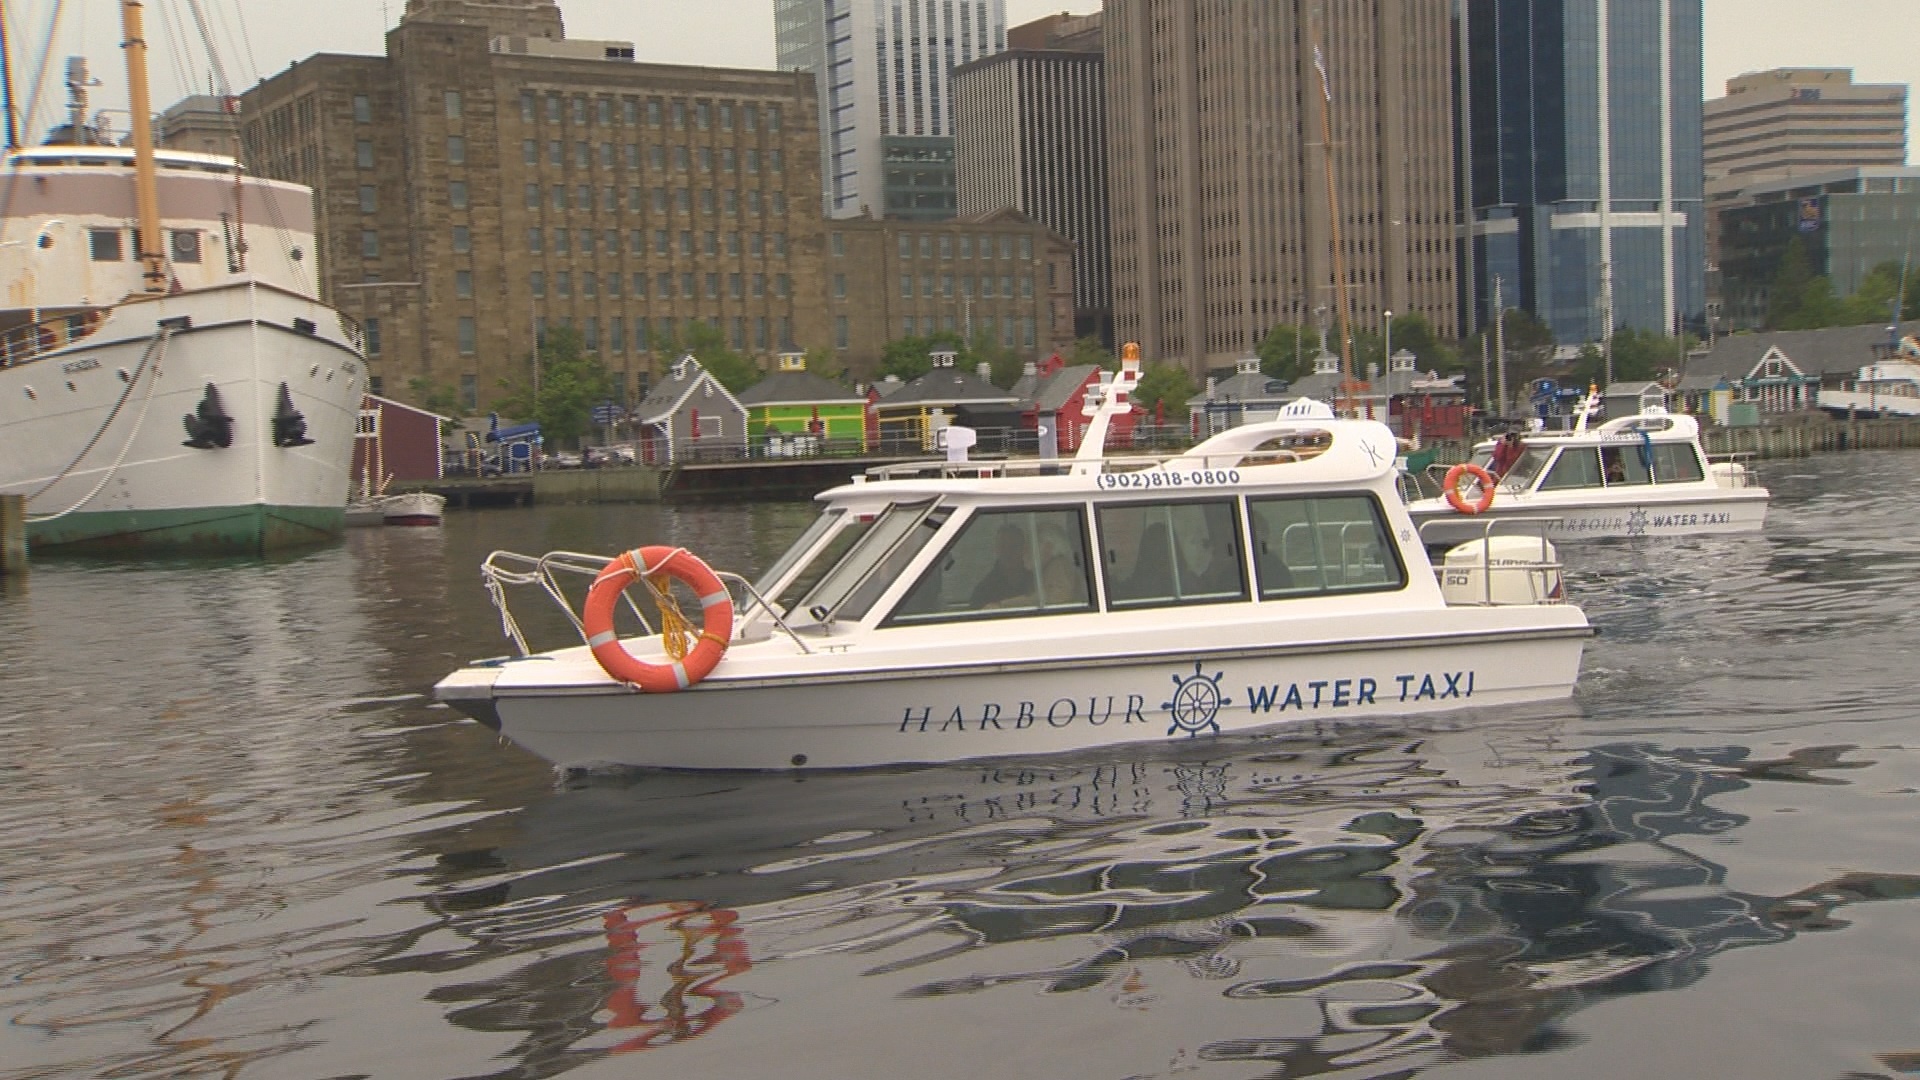 Water Taxi: A commuter ferry, A water-based cab company in Halifax. 1920x1080 Full HD Background.